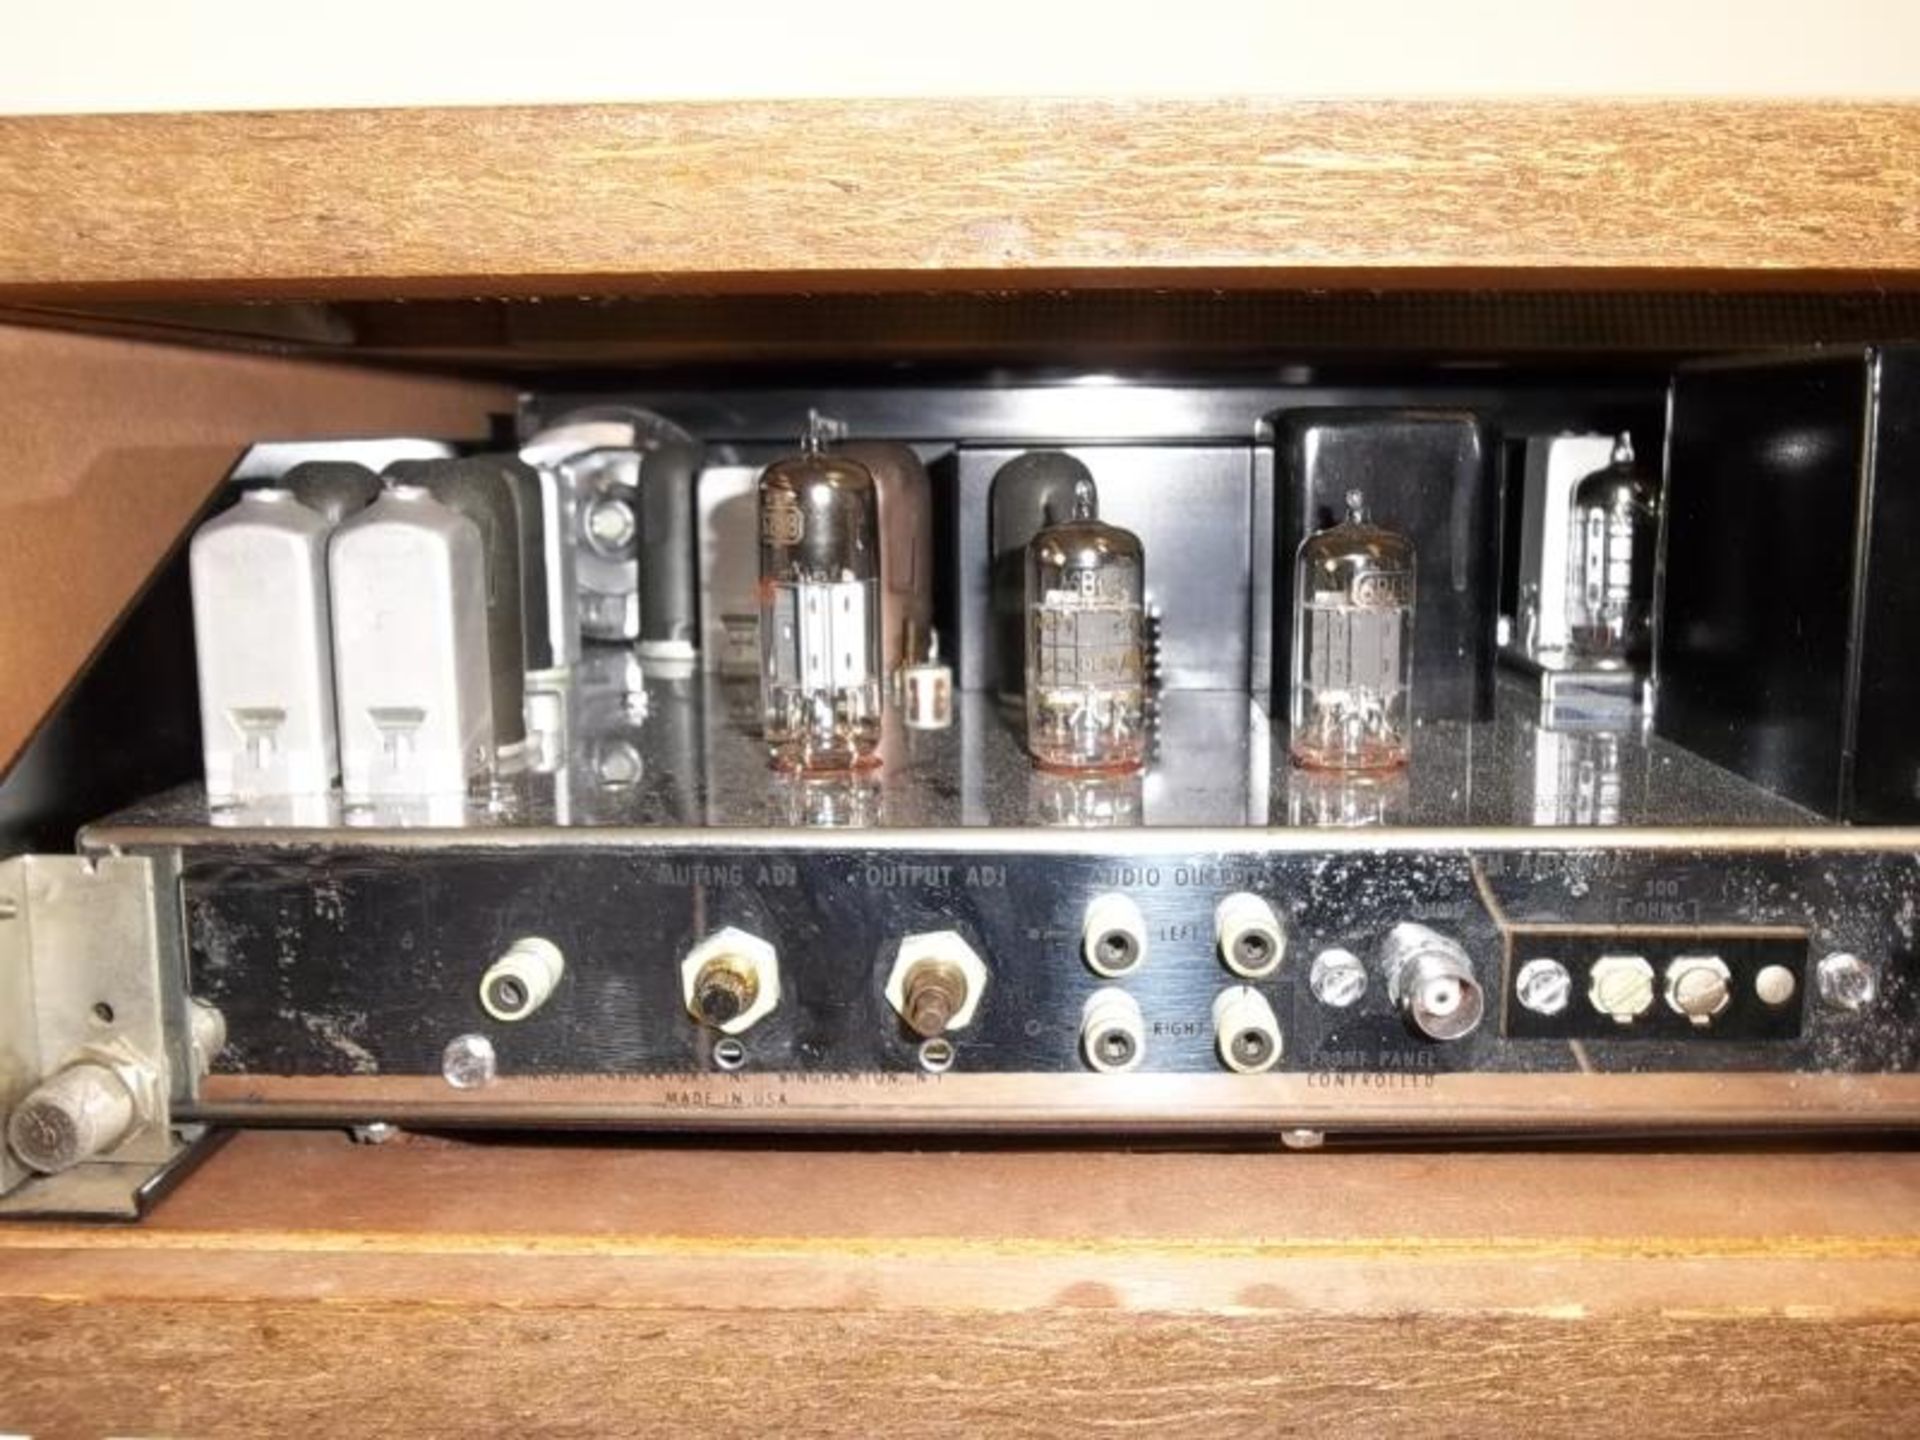 McIntosh MR-71 Stereo FM Tuner, wood case, s # 50B35, tested - powers up dimly - Image 6 of 7